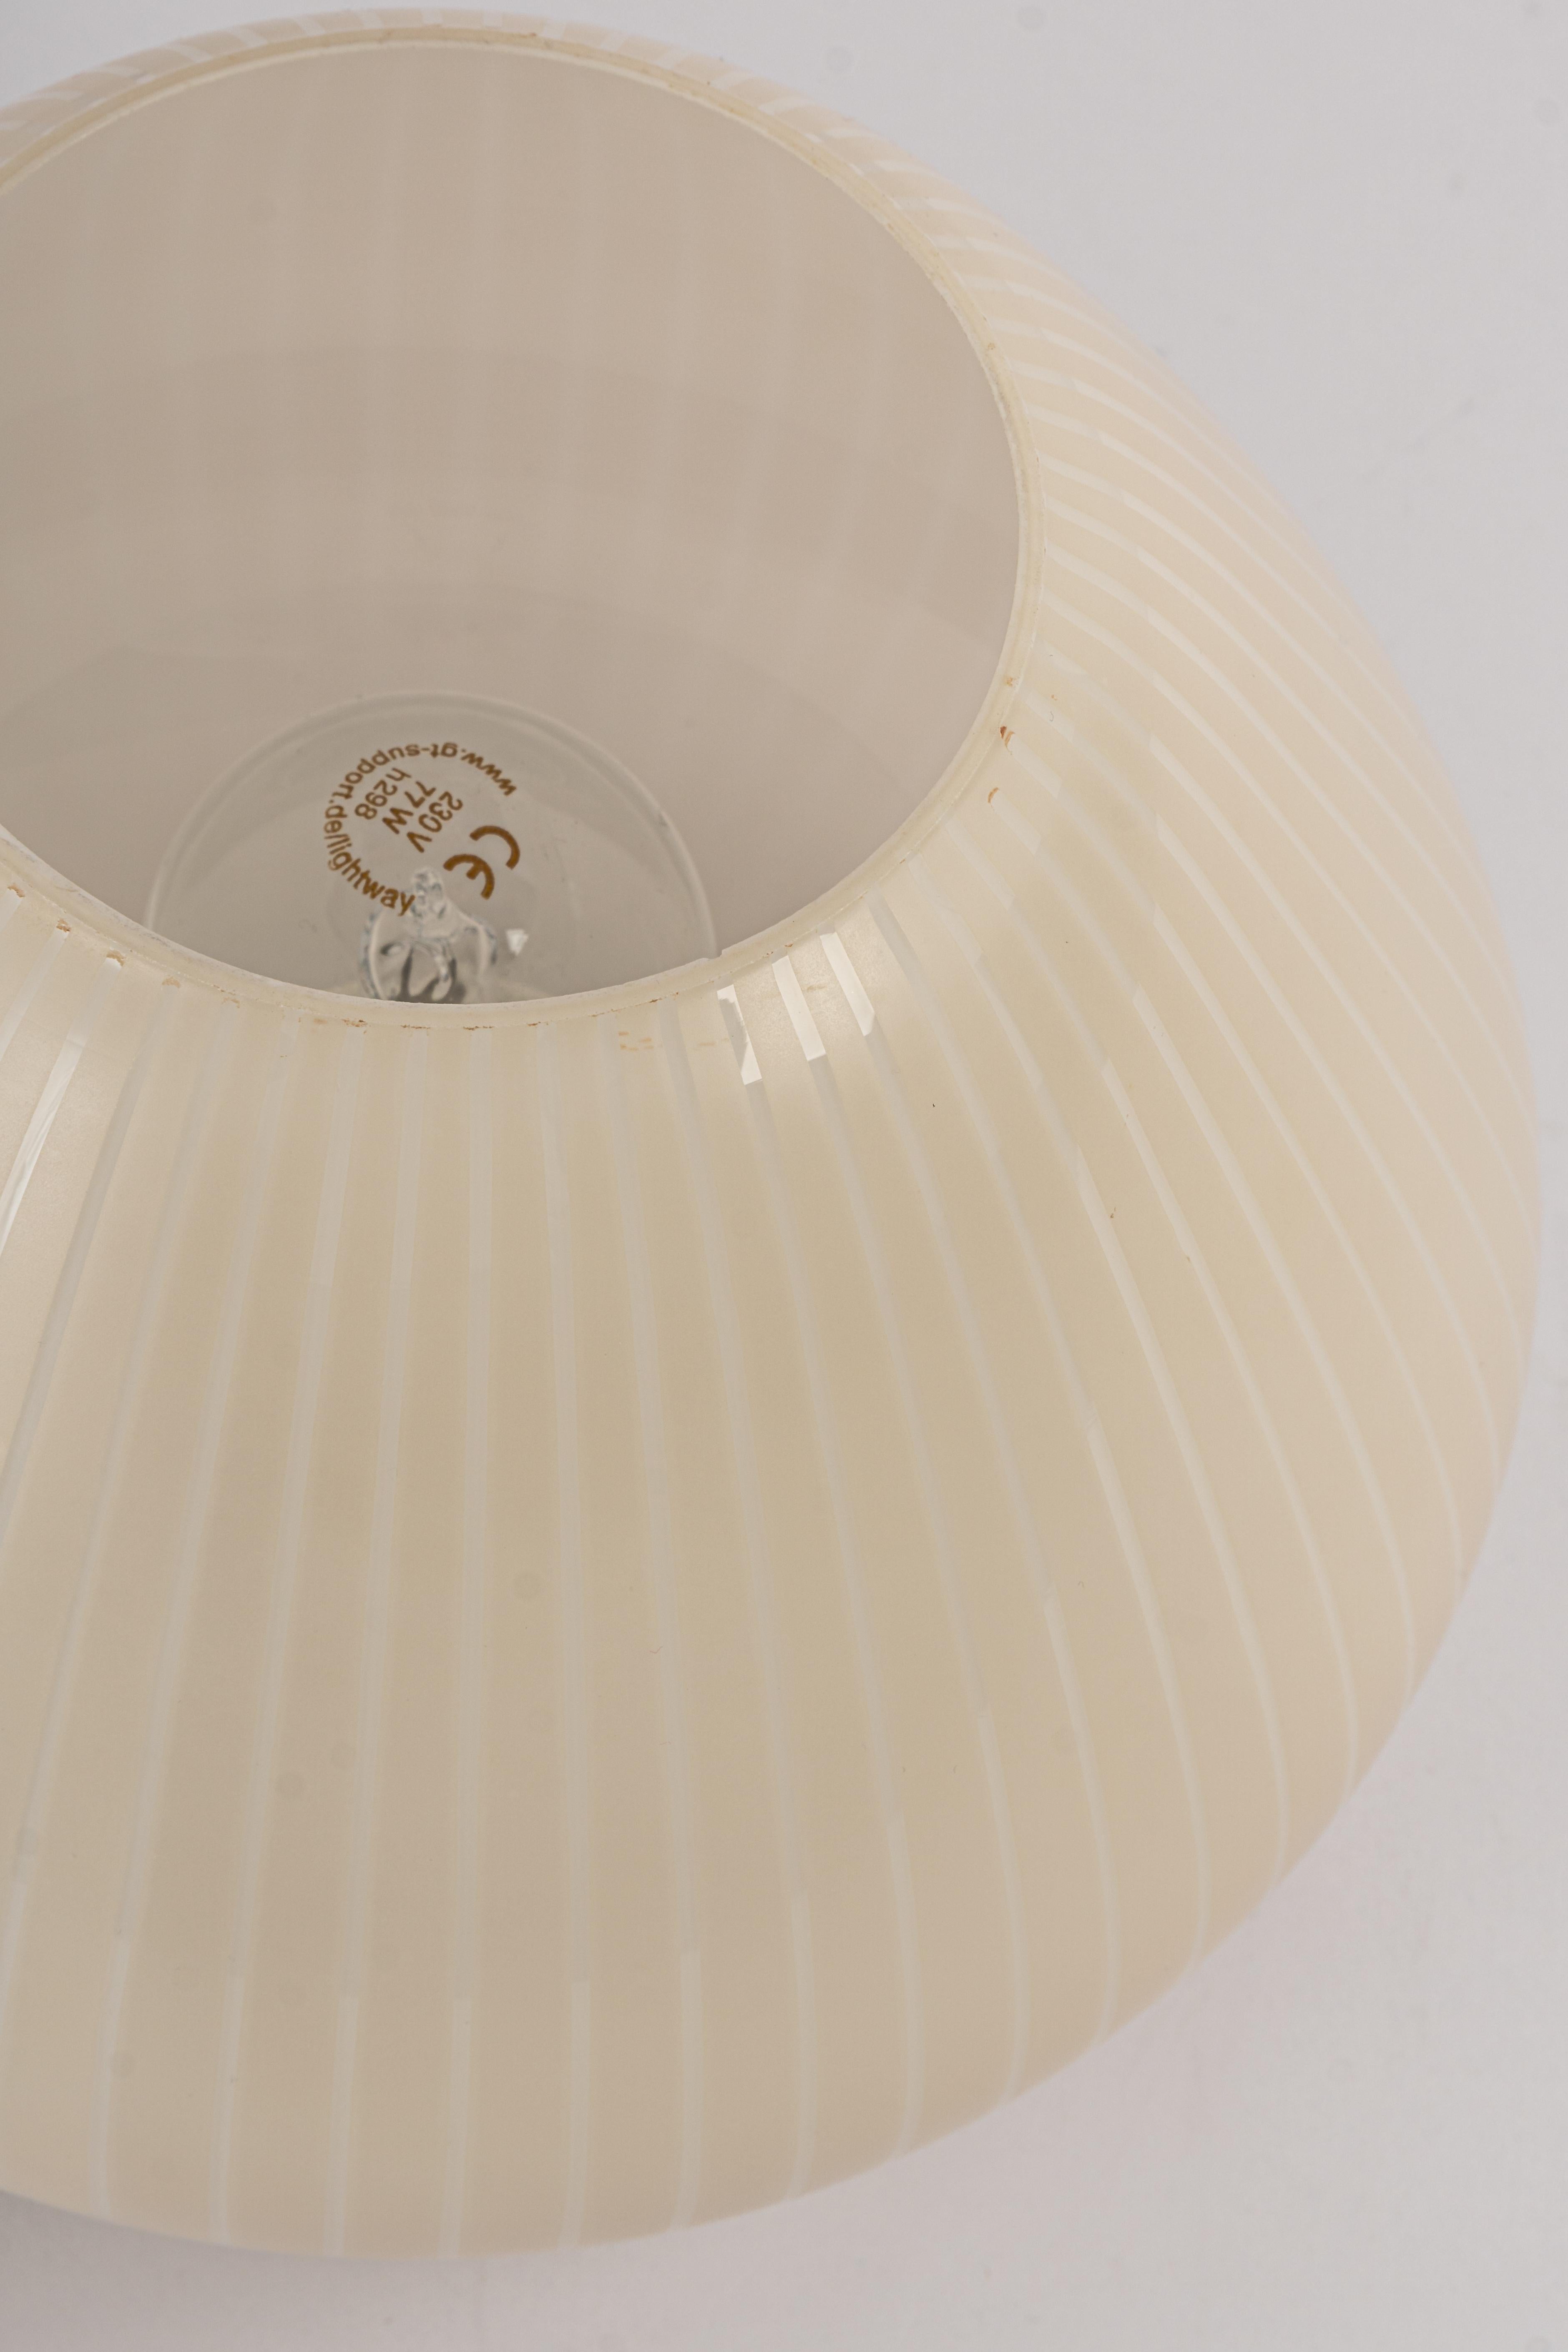 Mid-20th Century Petite Light Fixture Designed by Wagenfeld Peill & Putzler, Juno, Germany, 50s For Sale